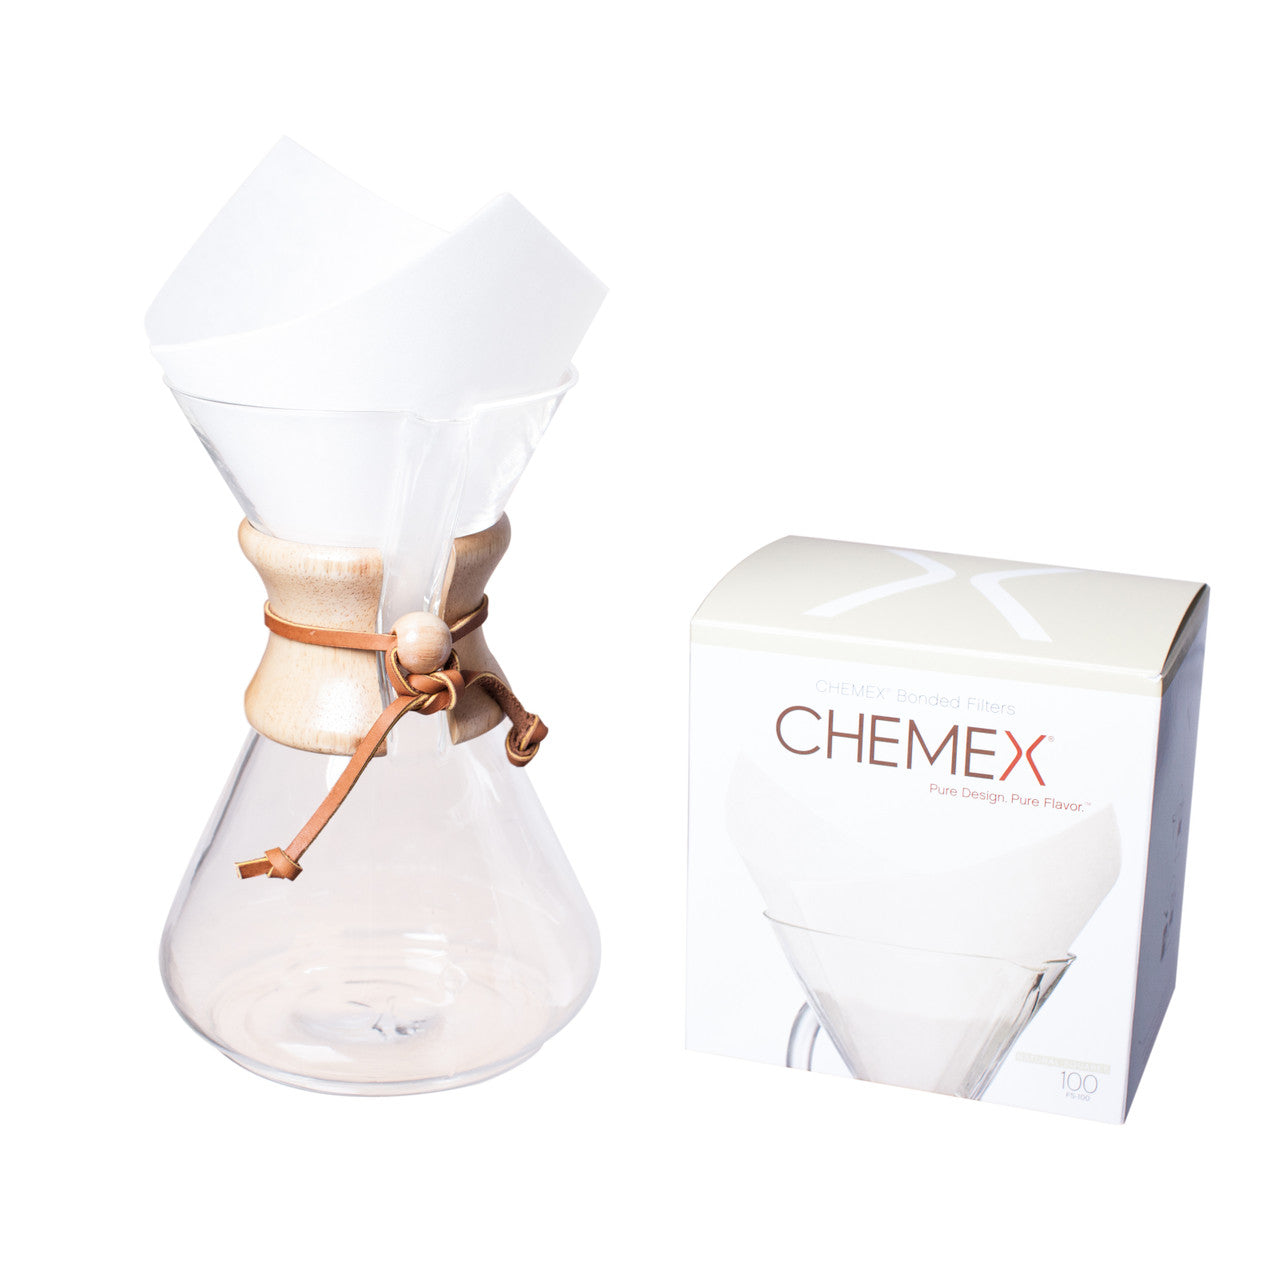 Chemex Bonded White Square Coffee Filters, 100 count